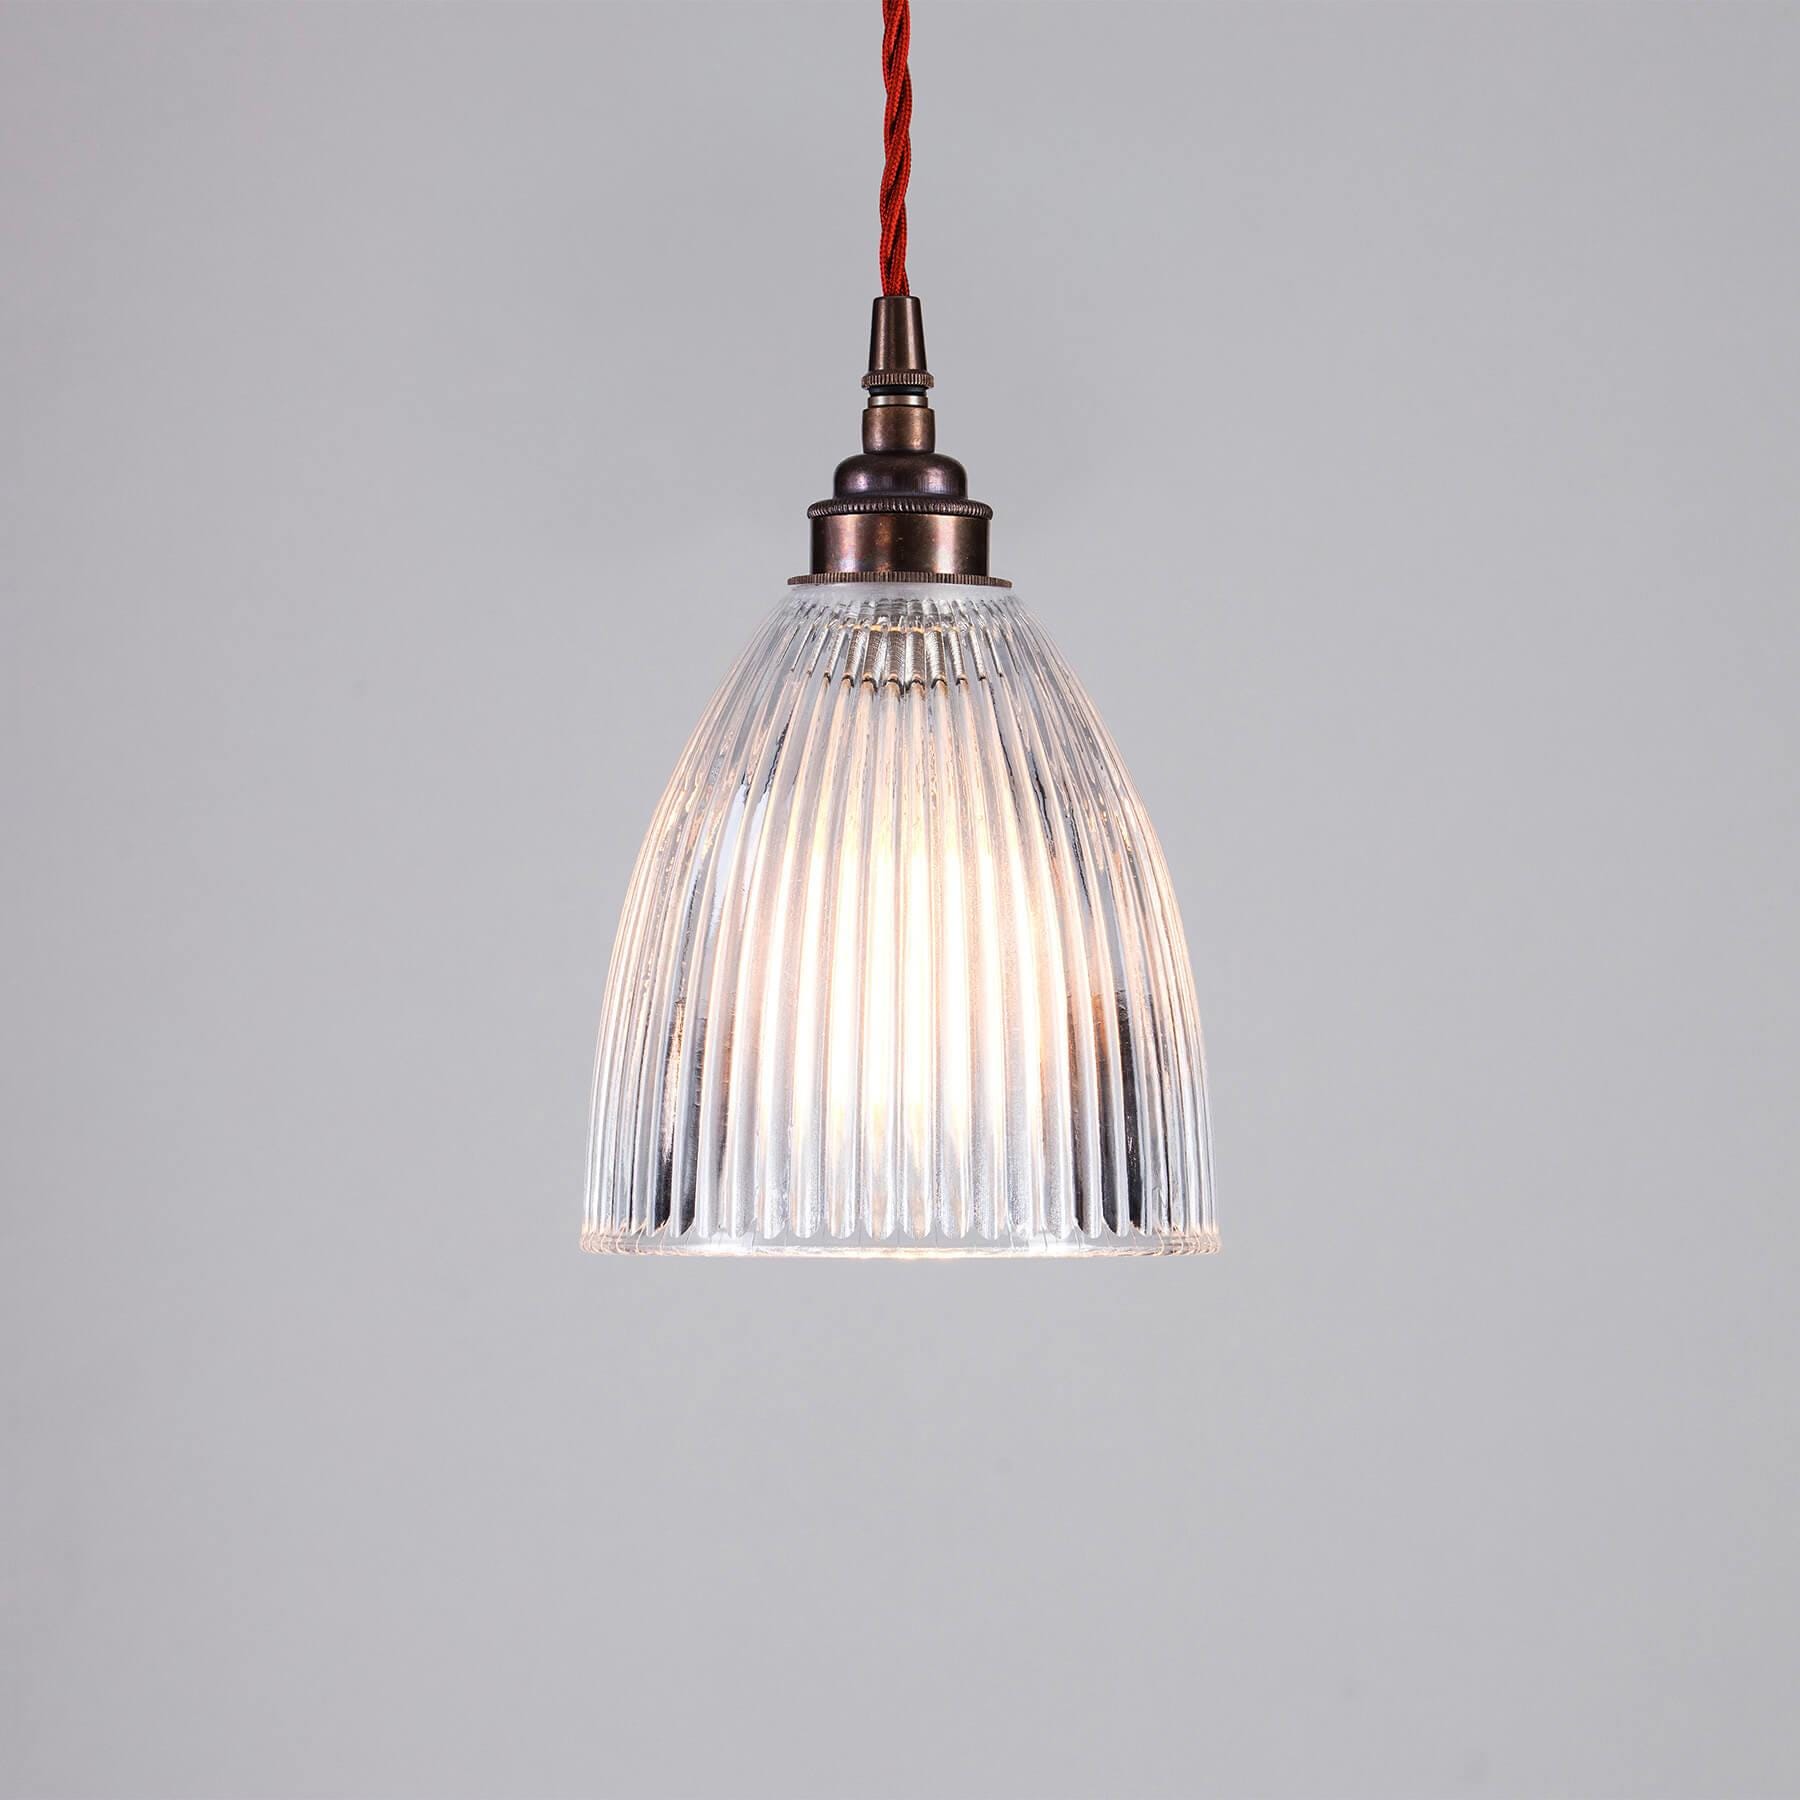 Old School Electric Black Friday Exclusive Elongated Prismatic Pendant Light With Coloured Flex Small Antique Brass Fittings And Red Flex Clear